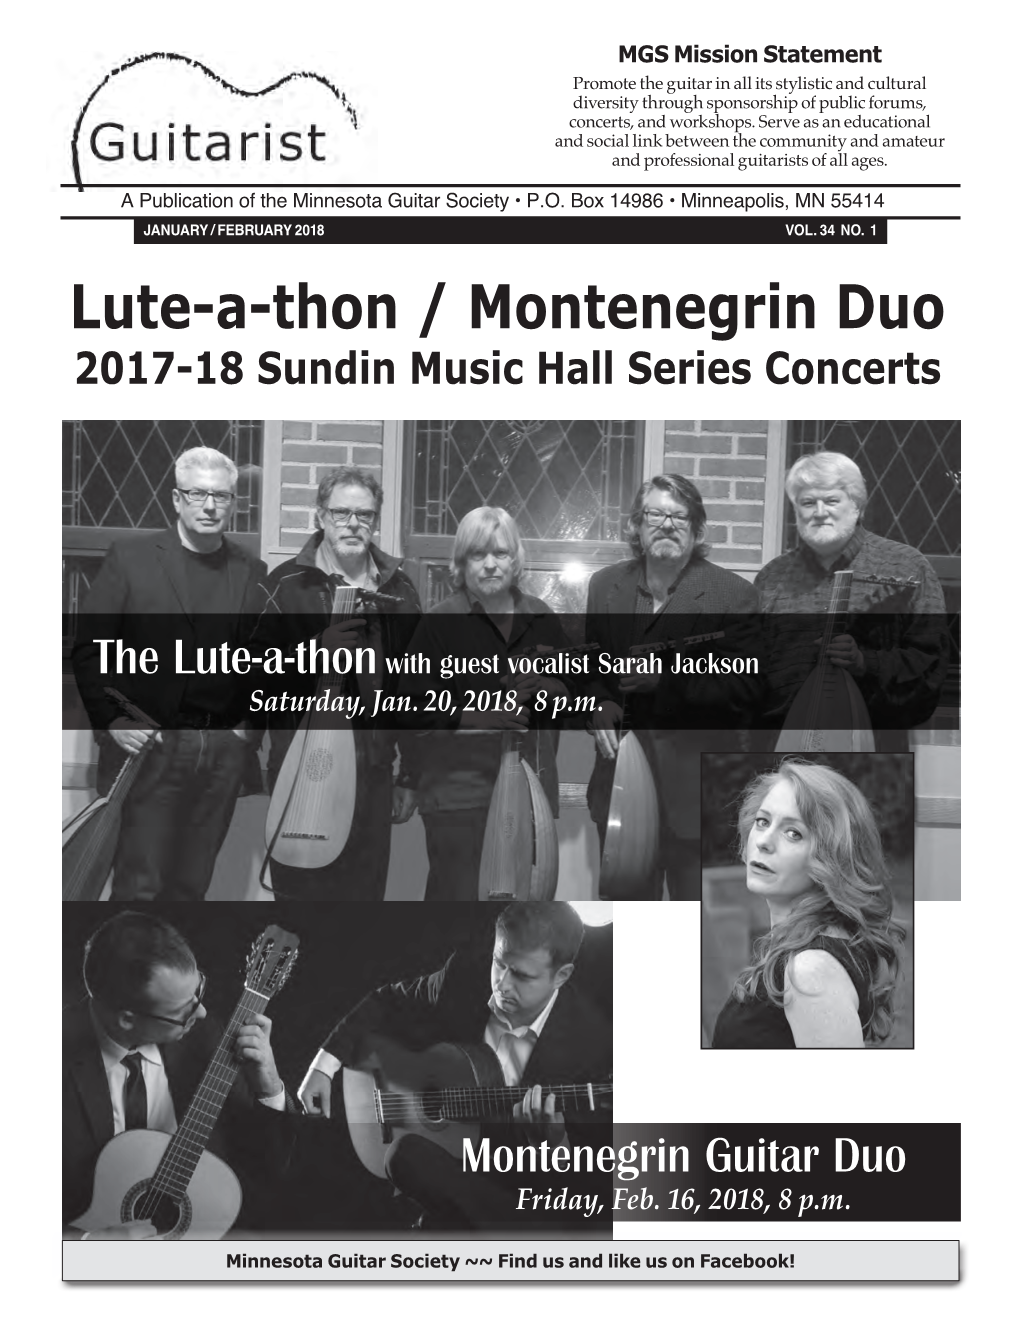 Lute-A-Thon / Montenegrin Duo 2017-18 Sundin Music Hall Series Concerts